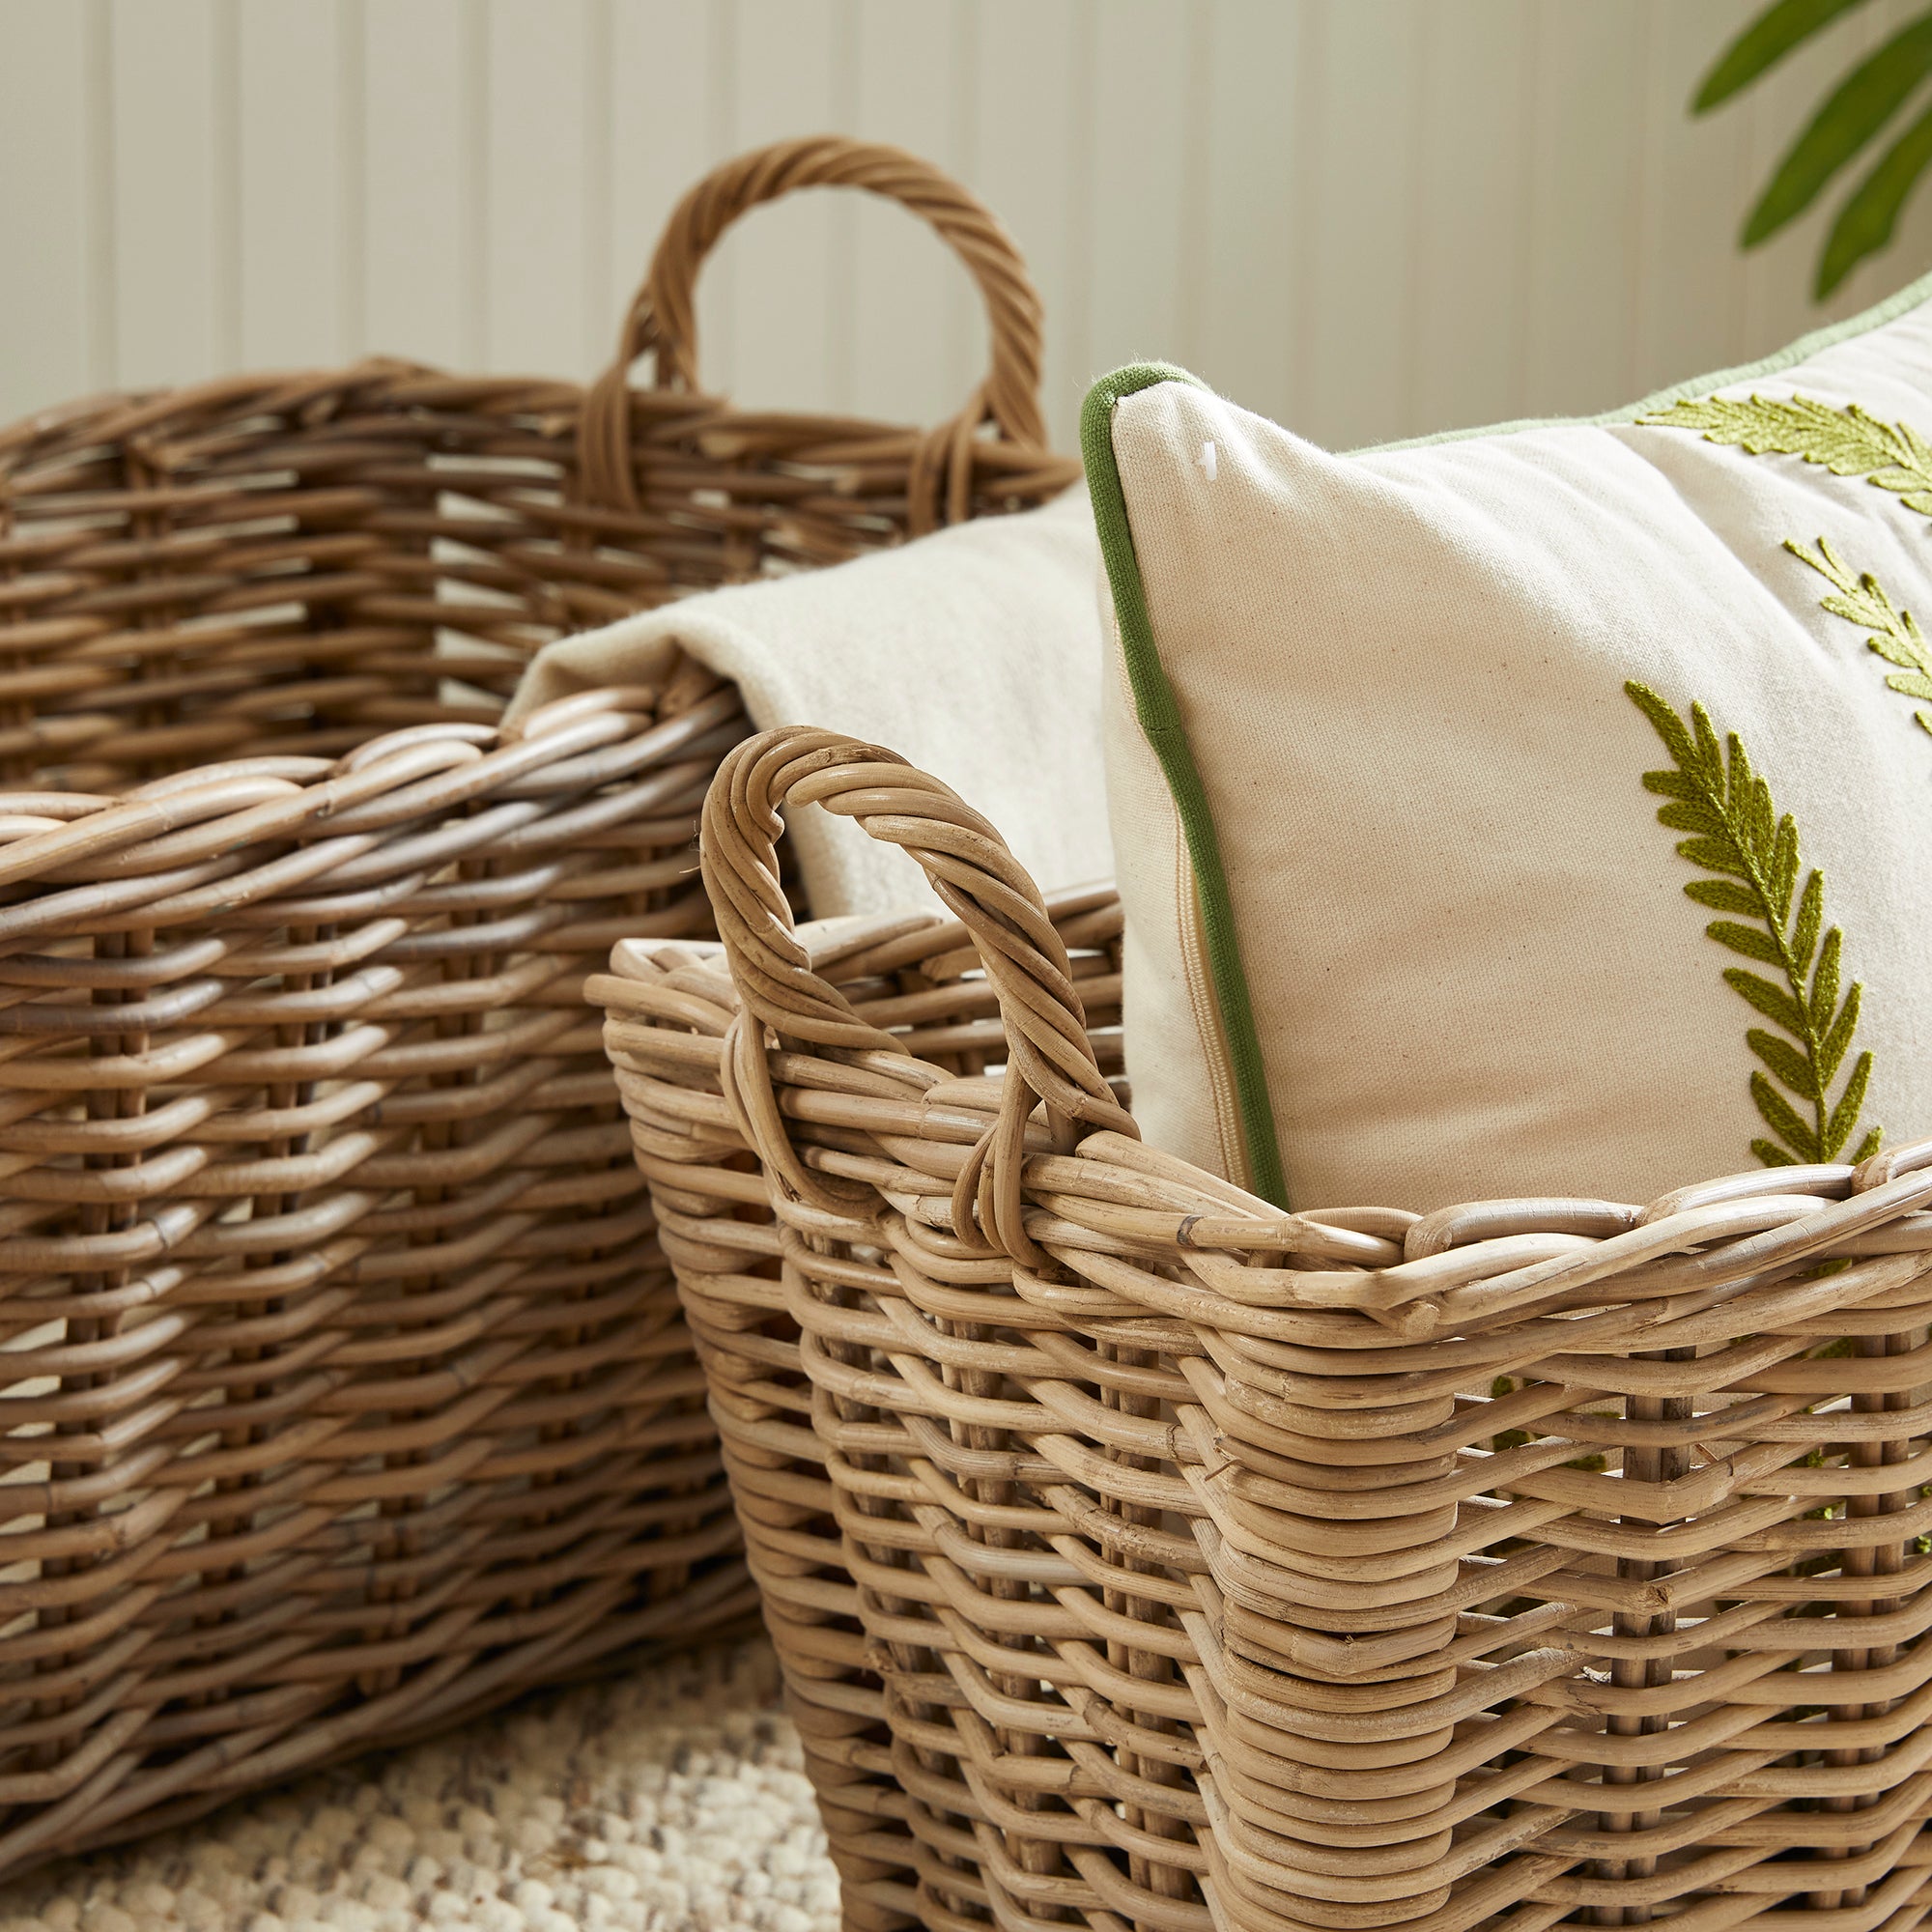 When it comes to the classic, casual appeal of rattan, these baskets are some of the best. They make a great set of laundry baskets or any thing you need stored beautifully. Amethyst Home provides interior design, new construction, custom furniture, and area rugs in the Scottsdale metro area.